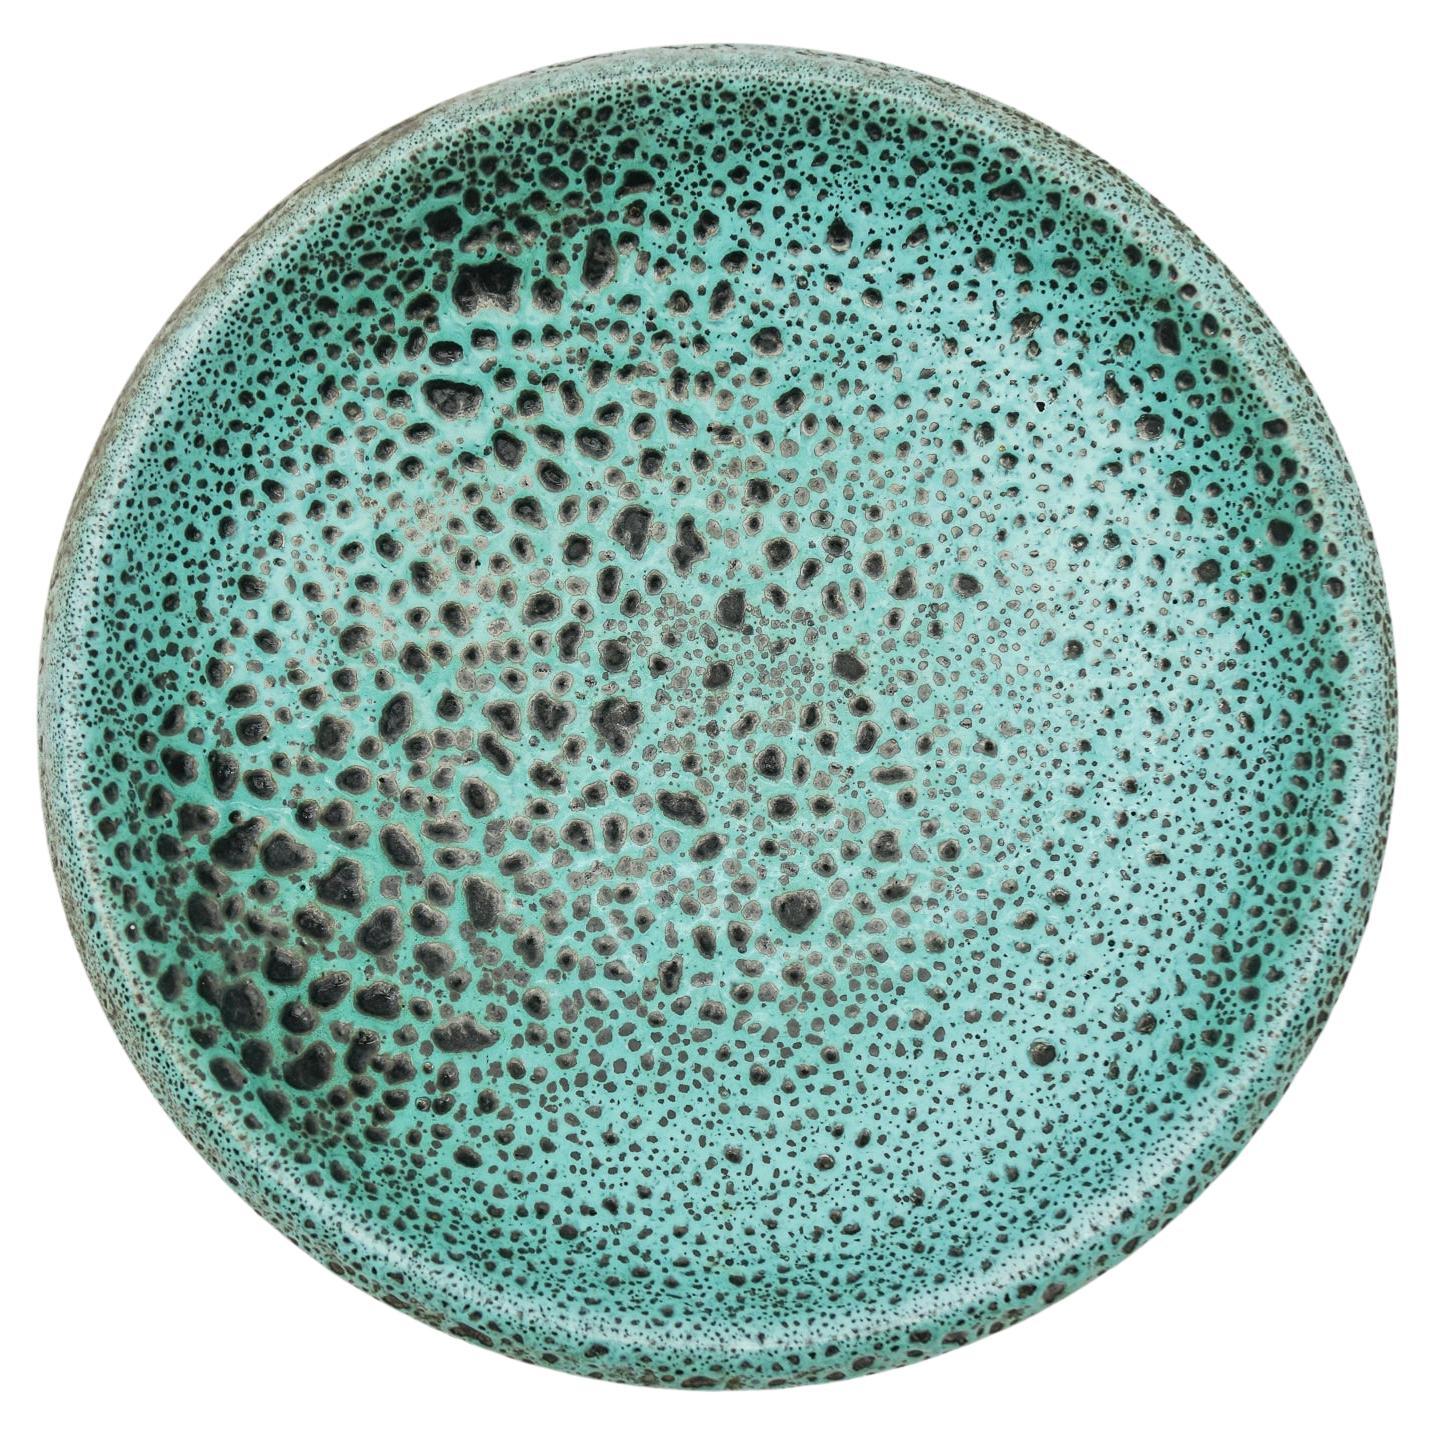 Lovely Green Studio Ceramic Round Plate by Wilhelm & Elly Kuch, 1960s, Germany For Sale